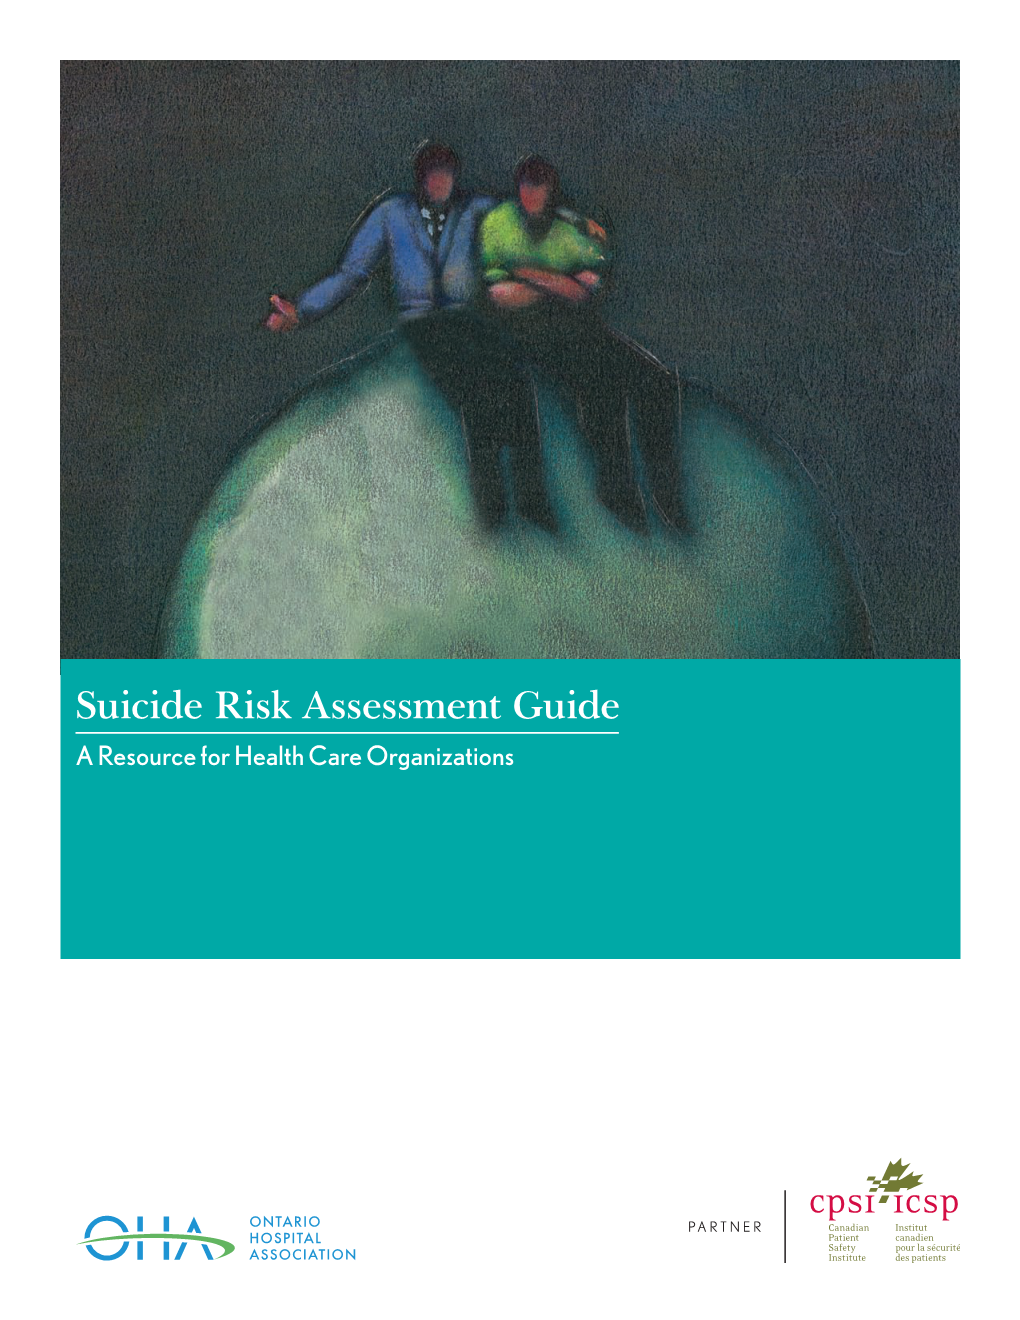 Suicide Risk Assessment Guide a Resource for Health Care Organizations